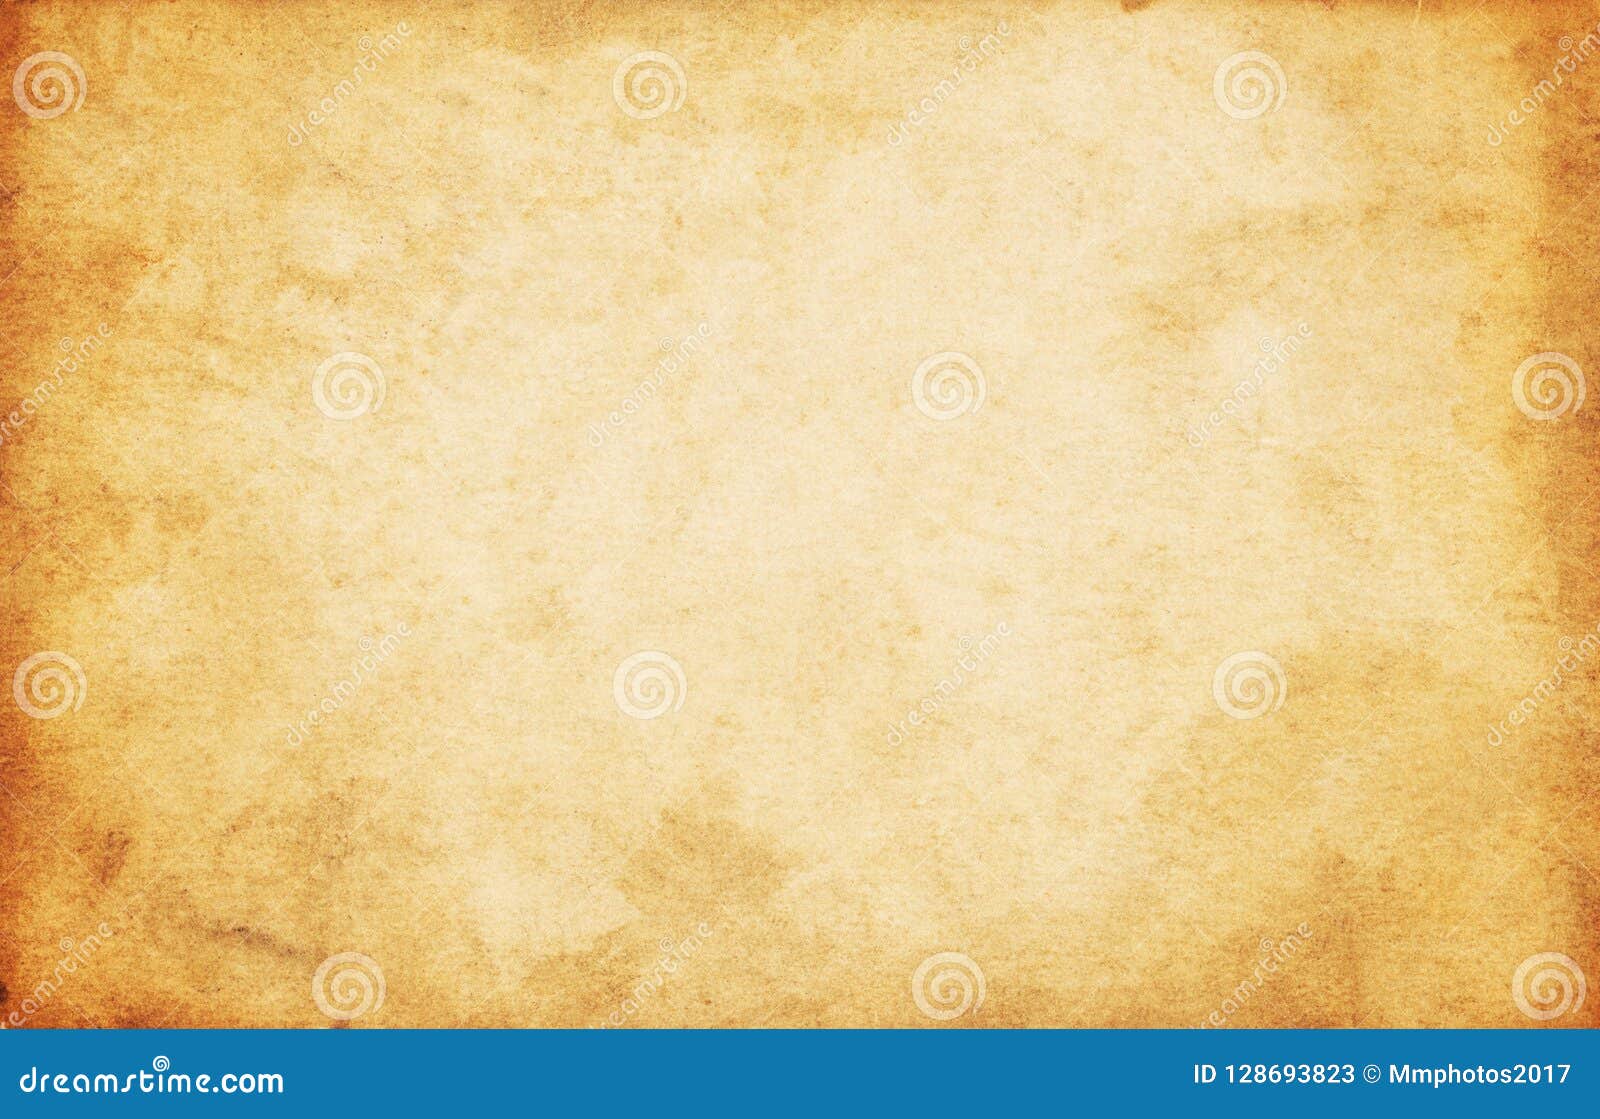 Brown Paper Texture Background Stock Image - Image of paper, high: 128693823